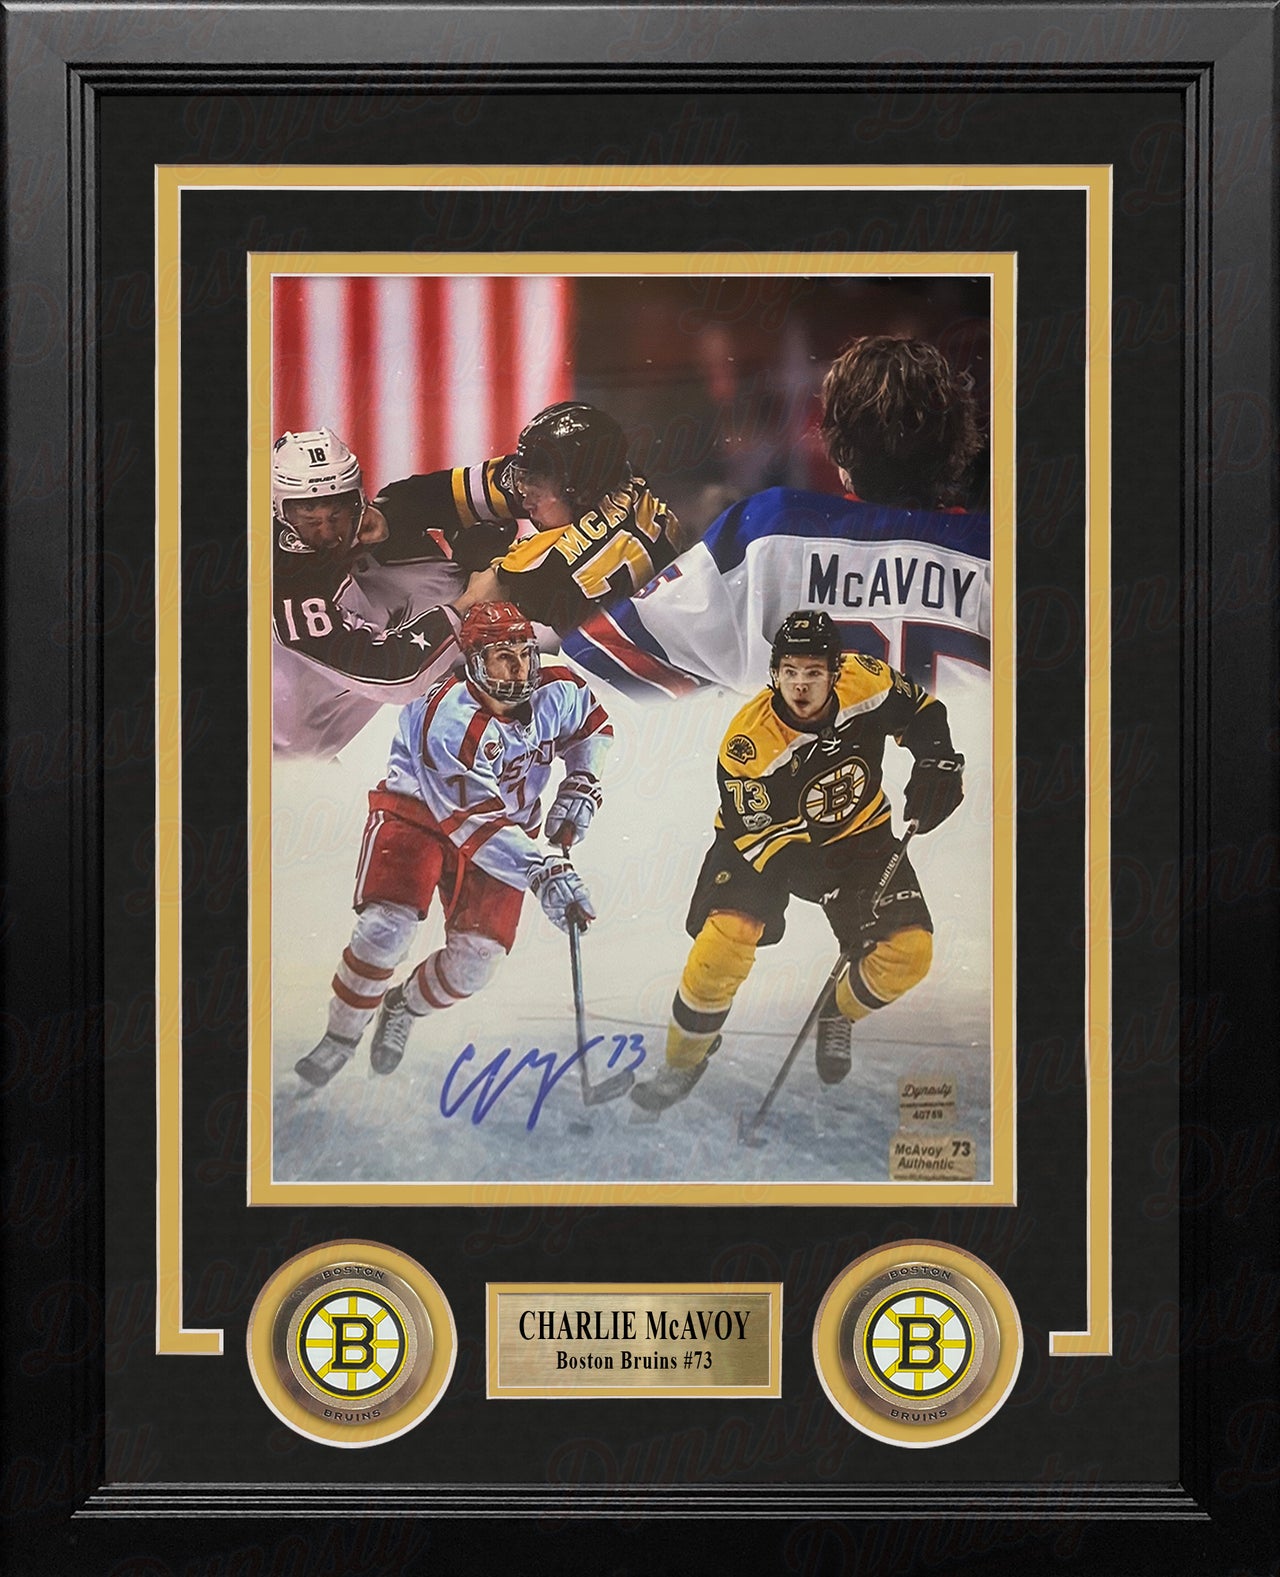 Charlie McAvoy Boston Bruins Autographed 8" x 10" Framed Collage Hockey Photo